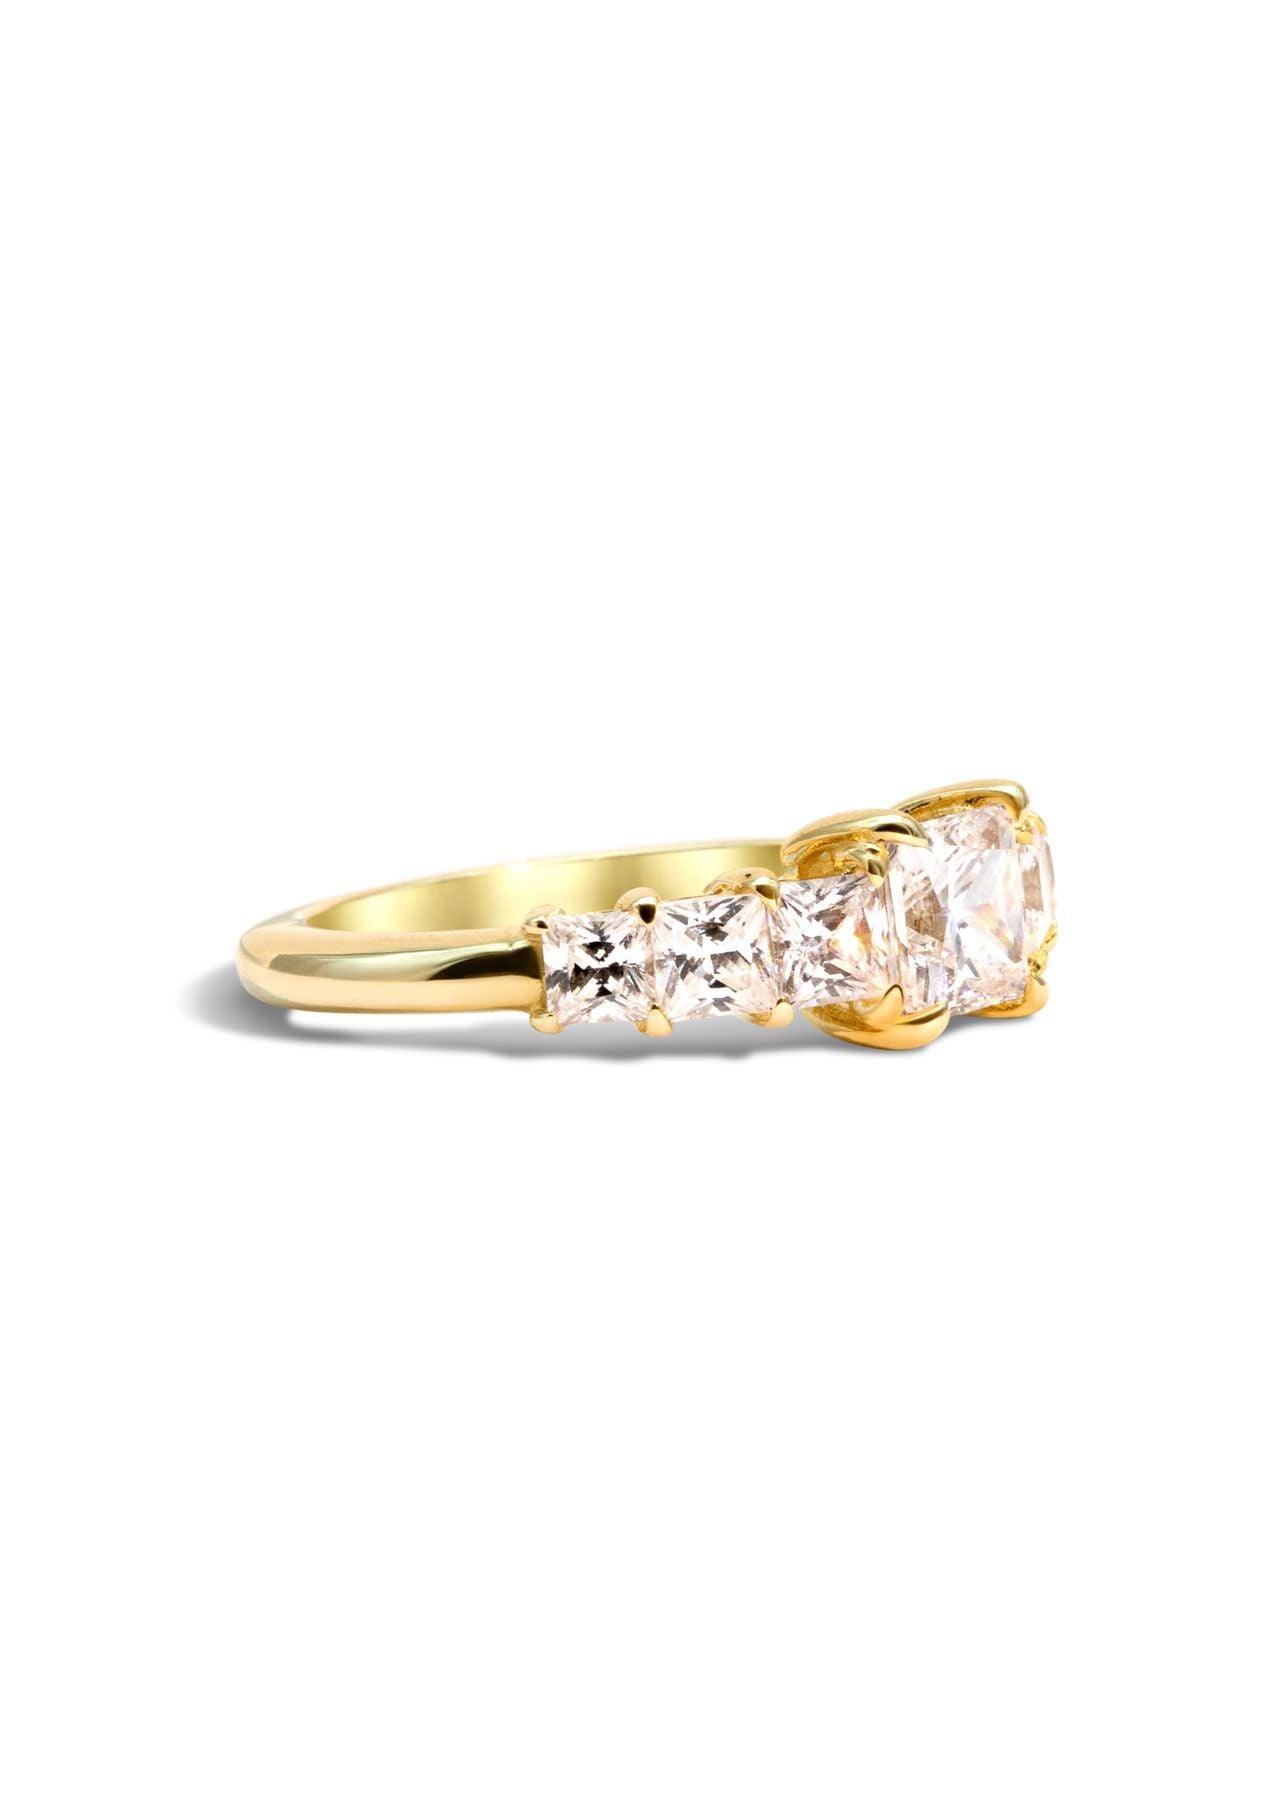 The Princess Banks Yellow Gold Cultured Diamond Ring - Molten Store